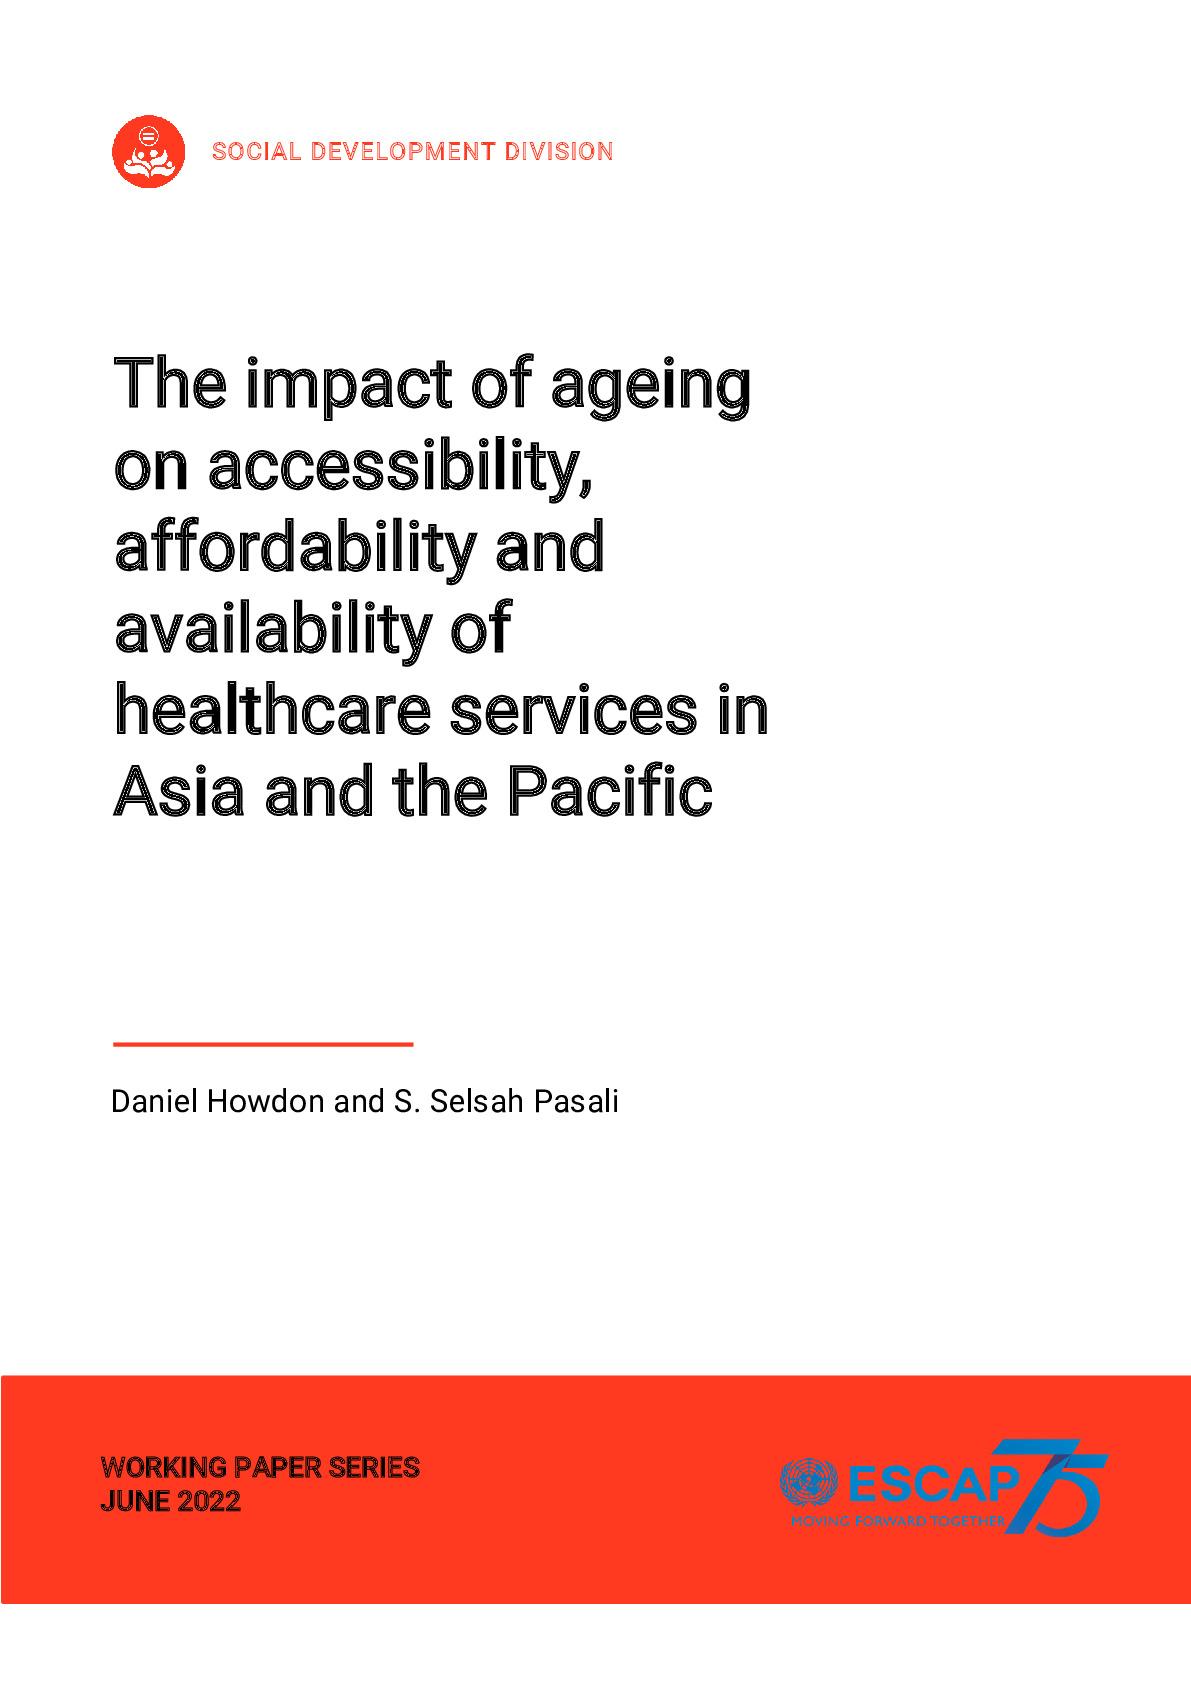 The impact of ageing on accessibility, affordability and availability of healthcare services in Asia and the Pacific